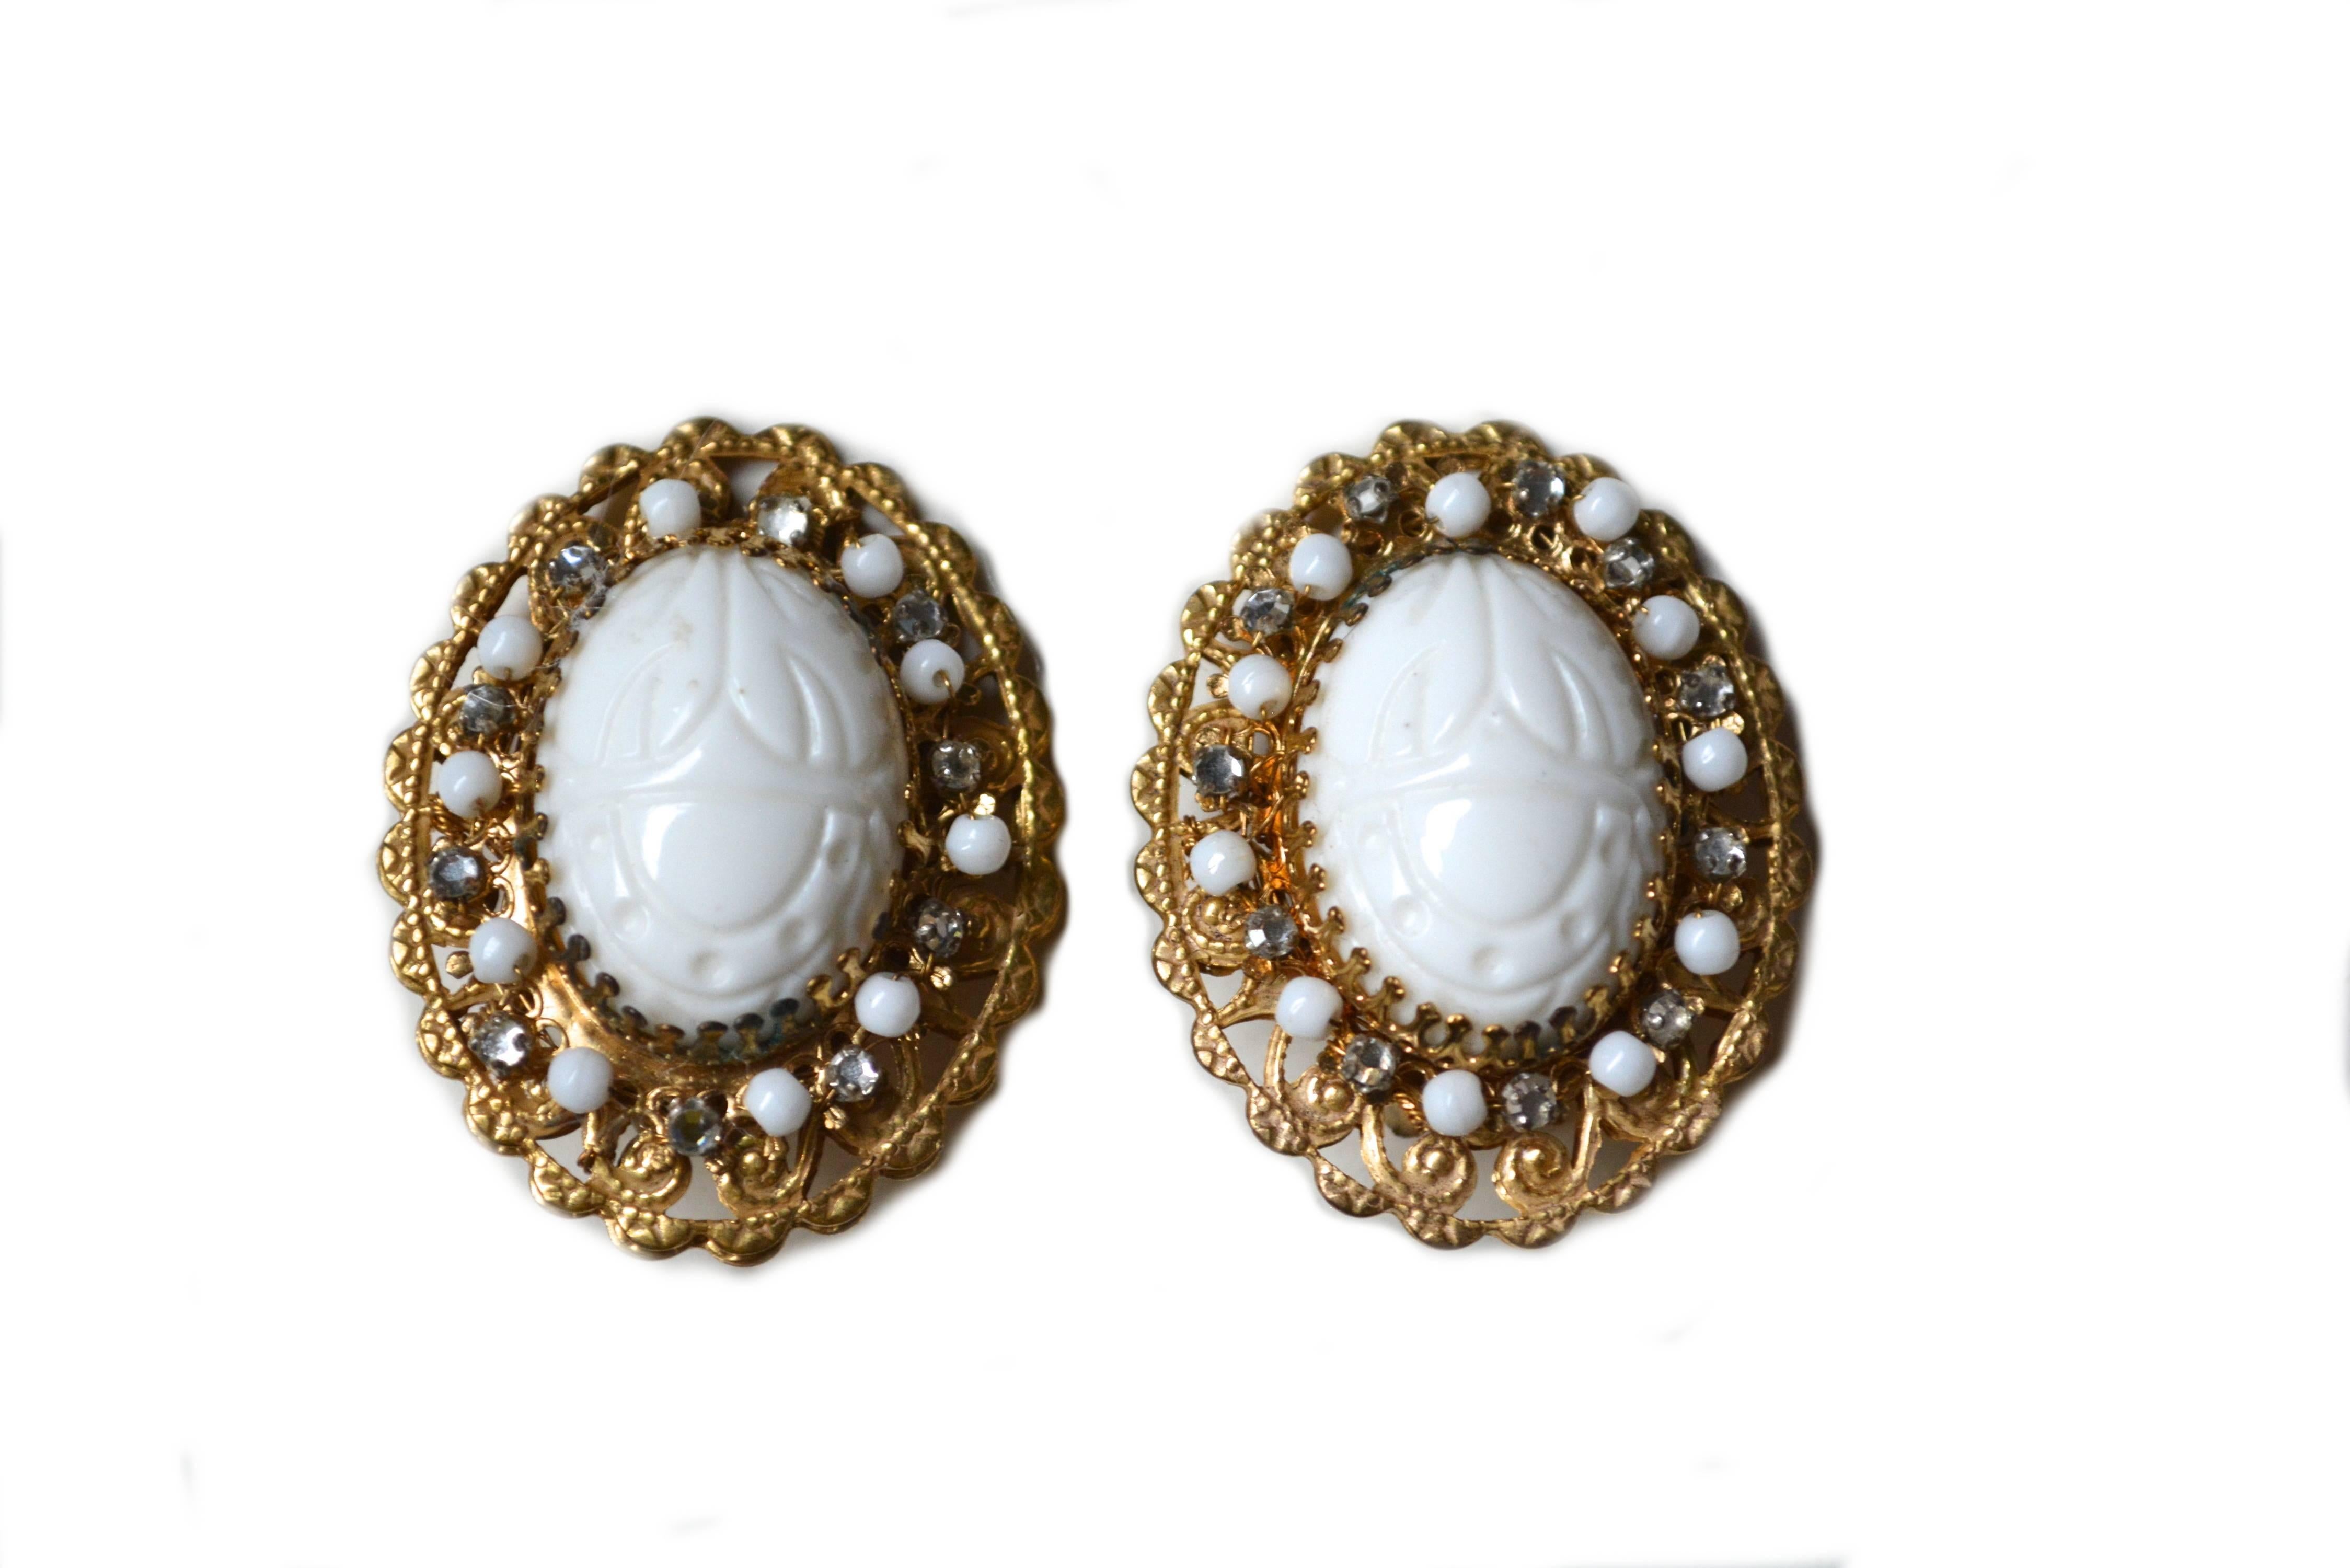 Milk glass scarab clip on earrings, signed Stanley Hagler.  Lovely white scarabs and Egyptian revival theme. Wired in beads covered by final filigree back.  2